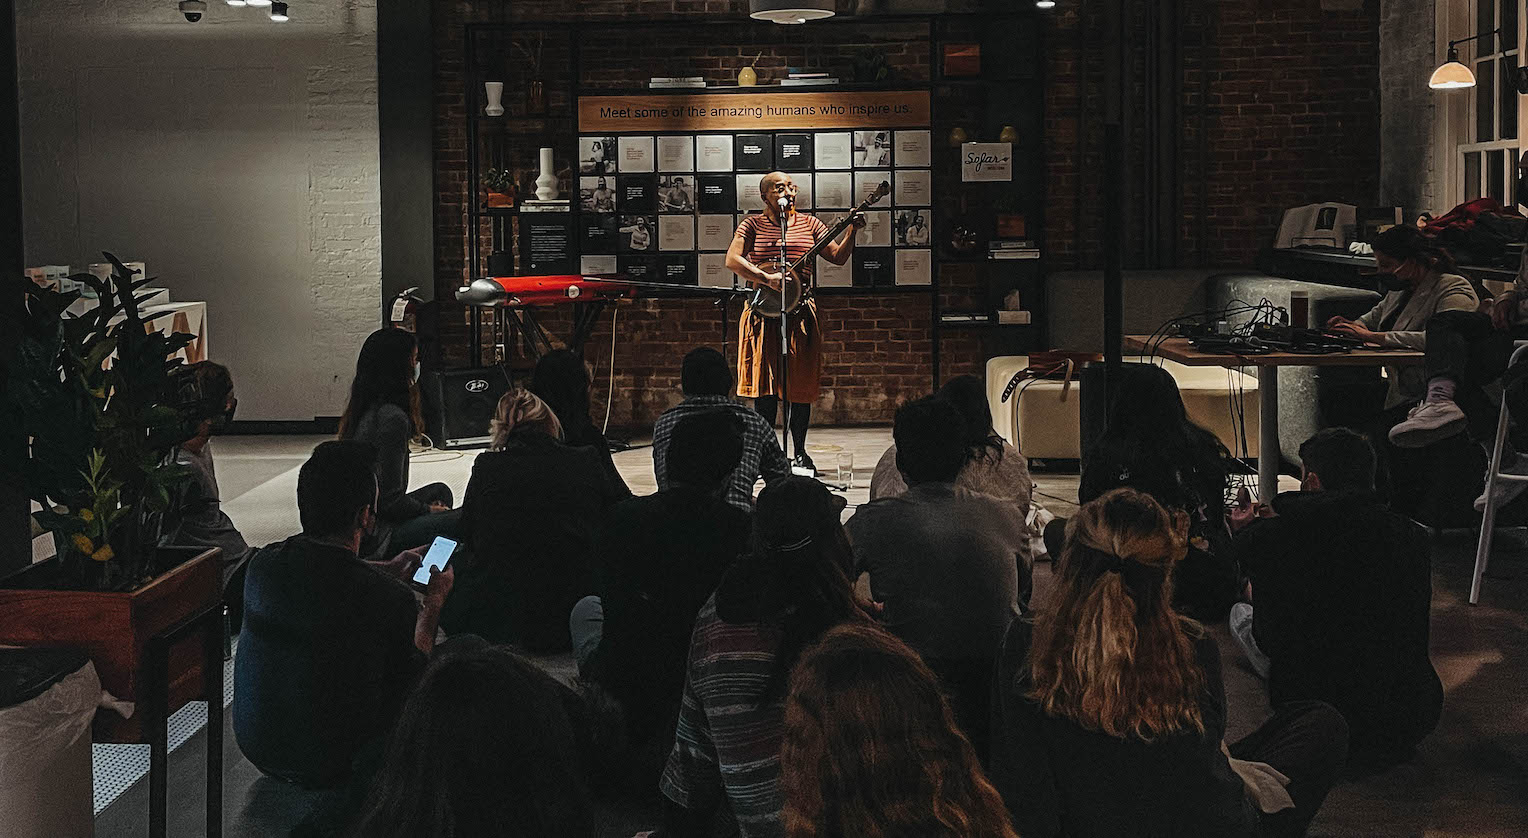 Sofar Sounds Offers Affordable Concert Opportunities to College Students